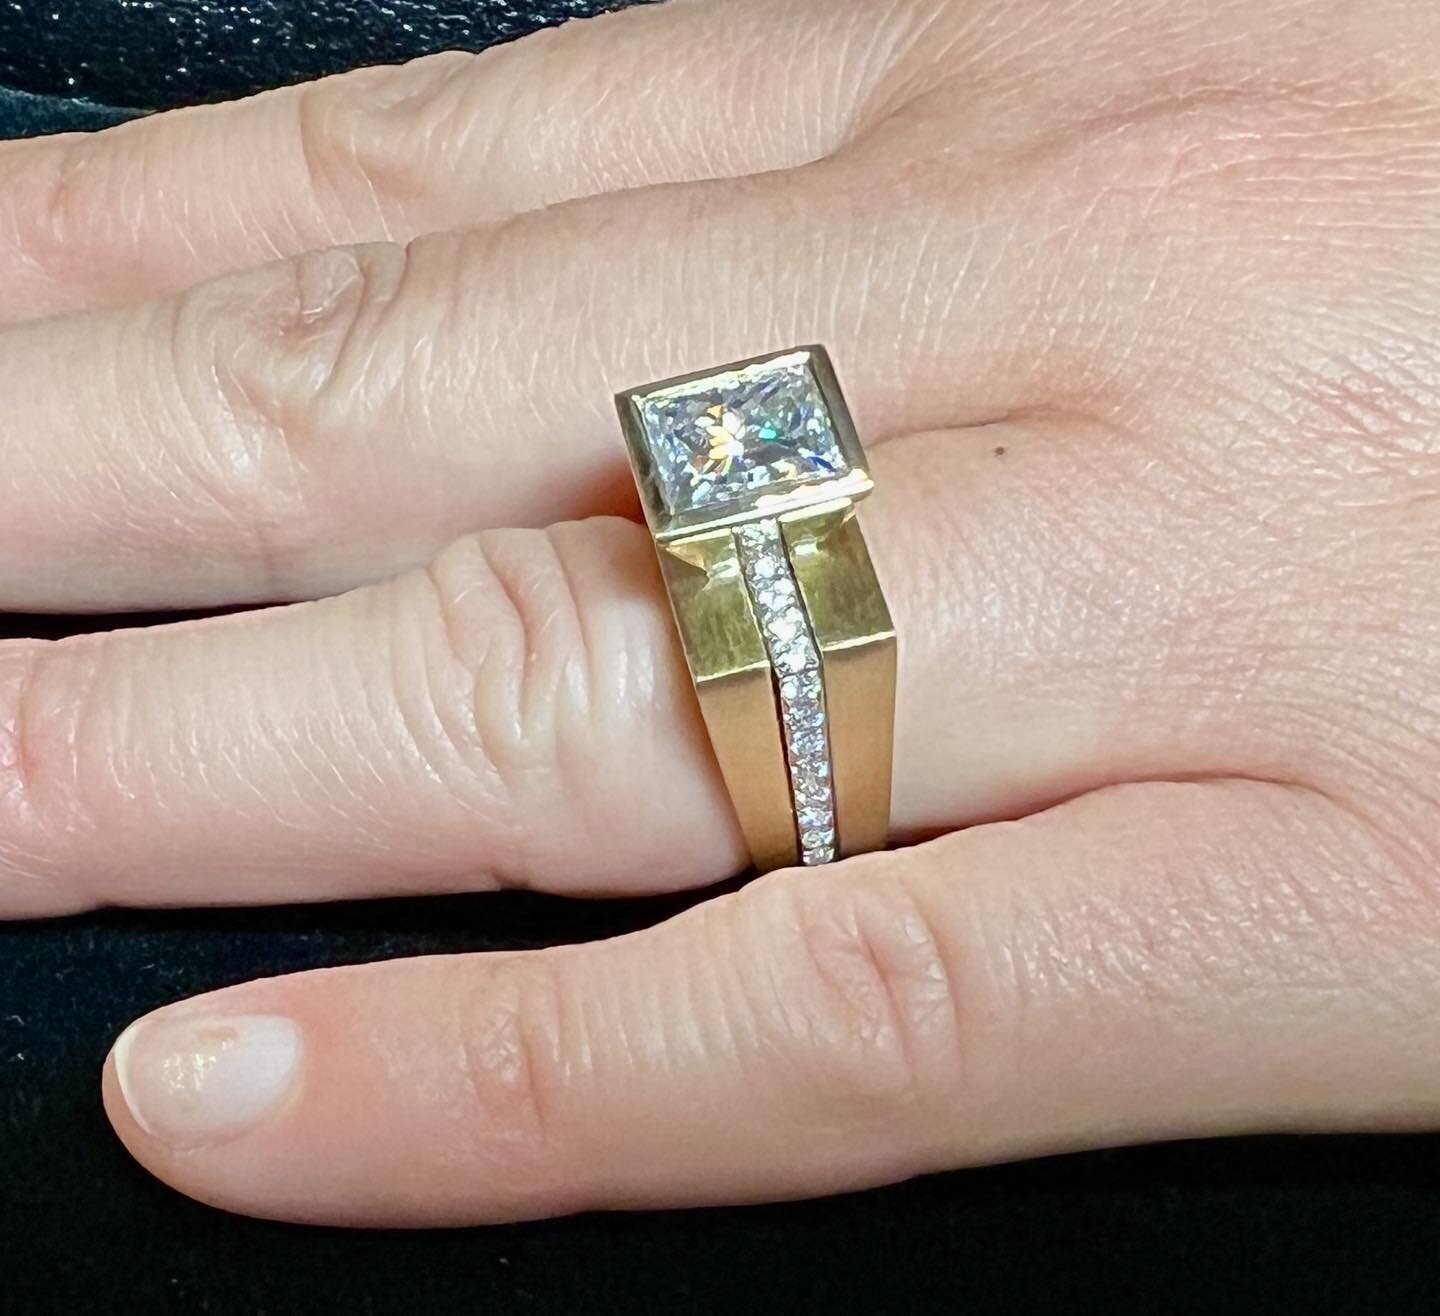 Wedded bliss!  2.0 cts princess cut diamond in yellow gold tapered bezel and squared shank ring with pace&rsquo;d diamond band to fit in between .